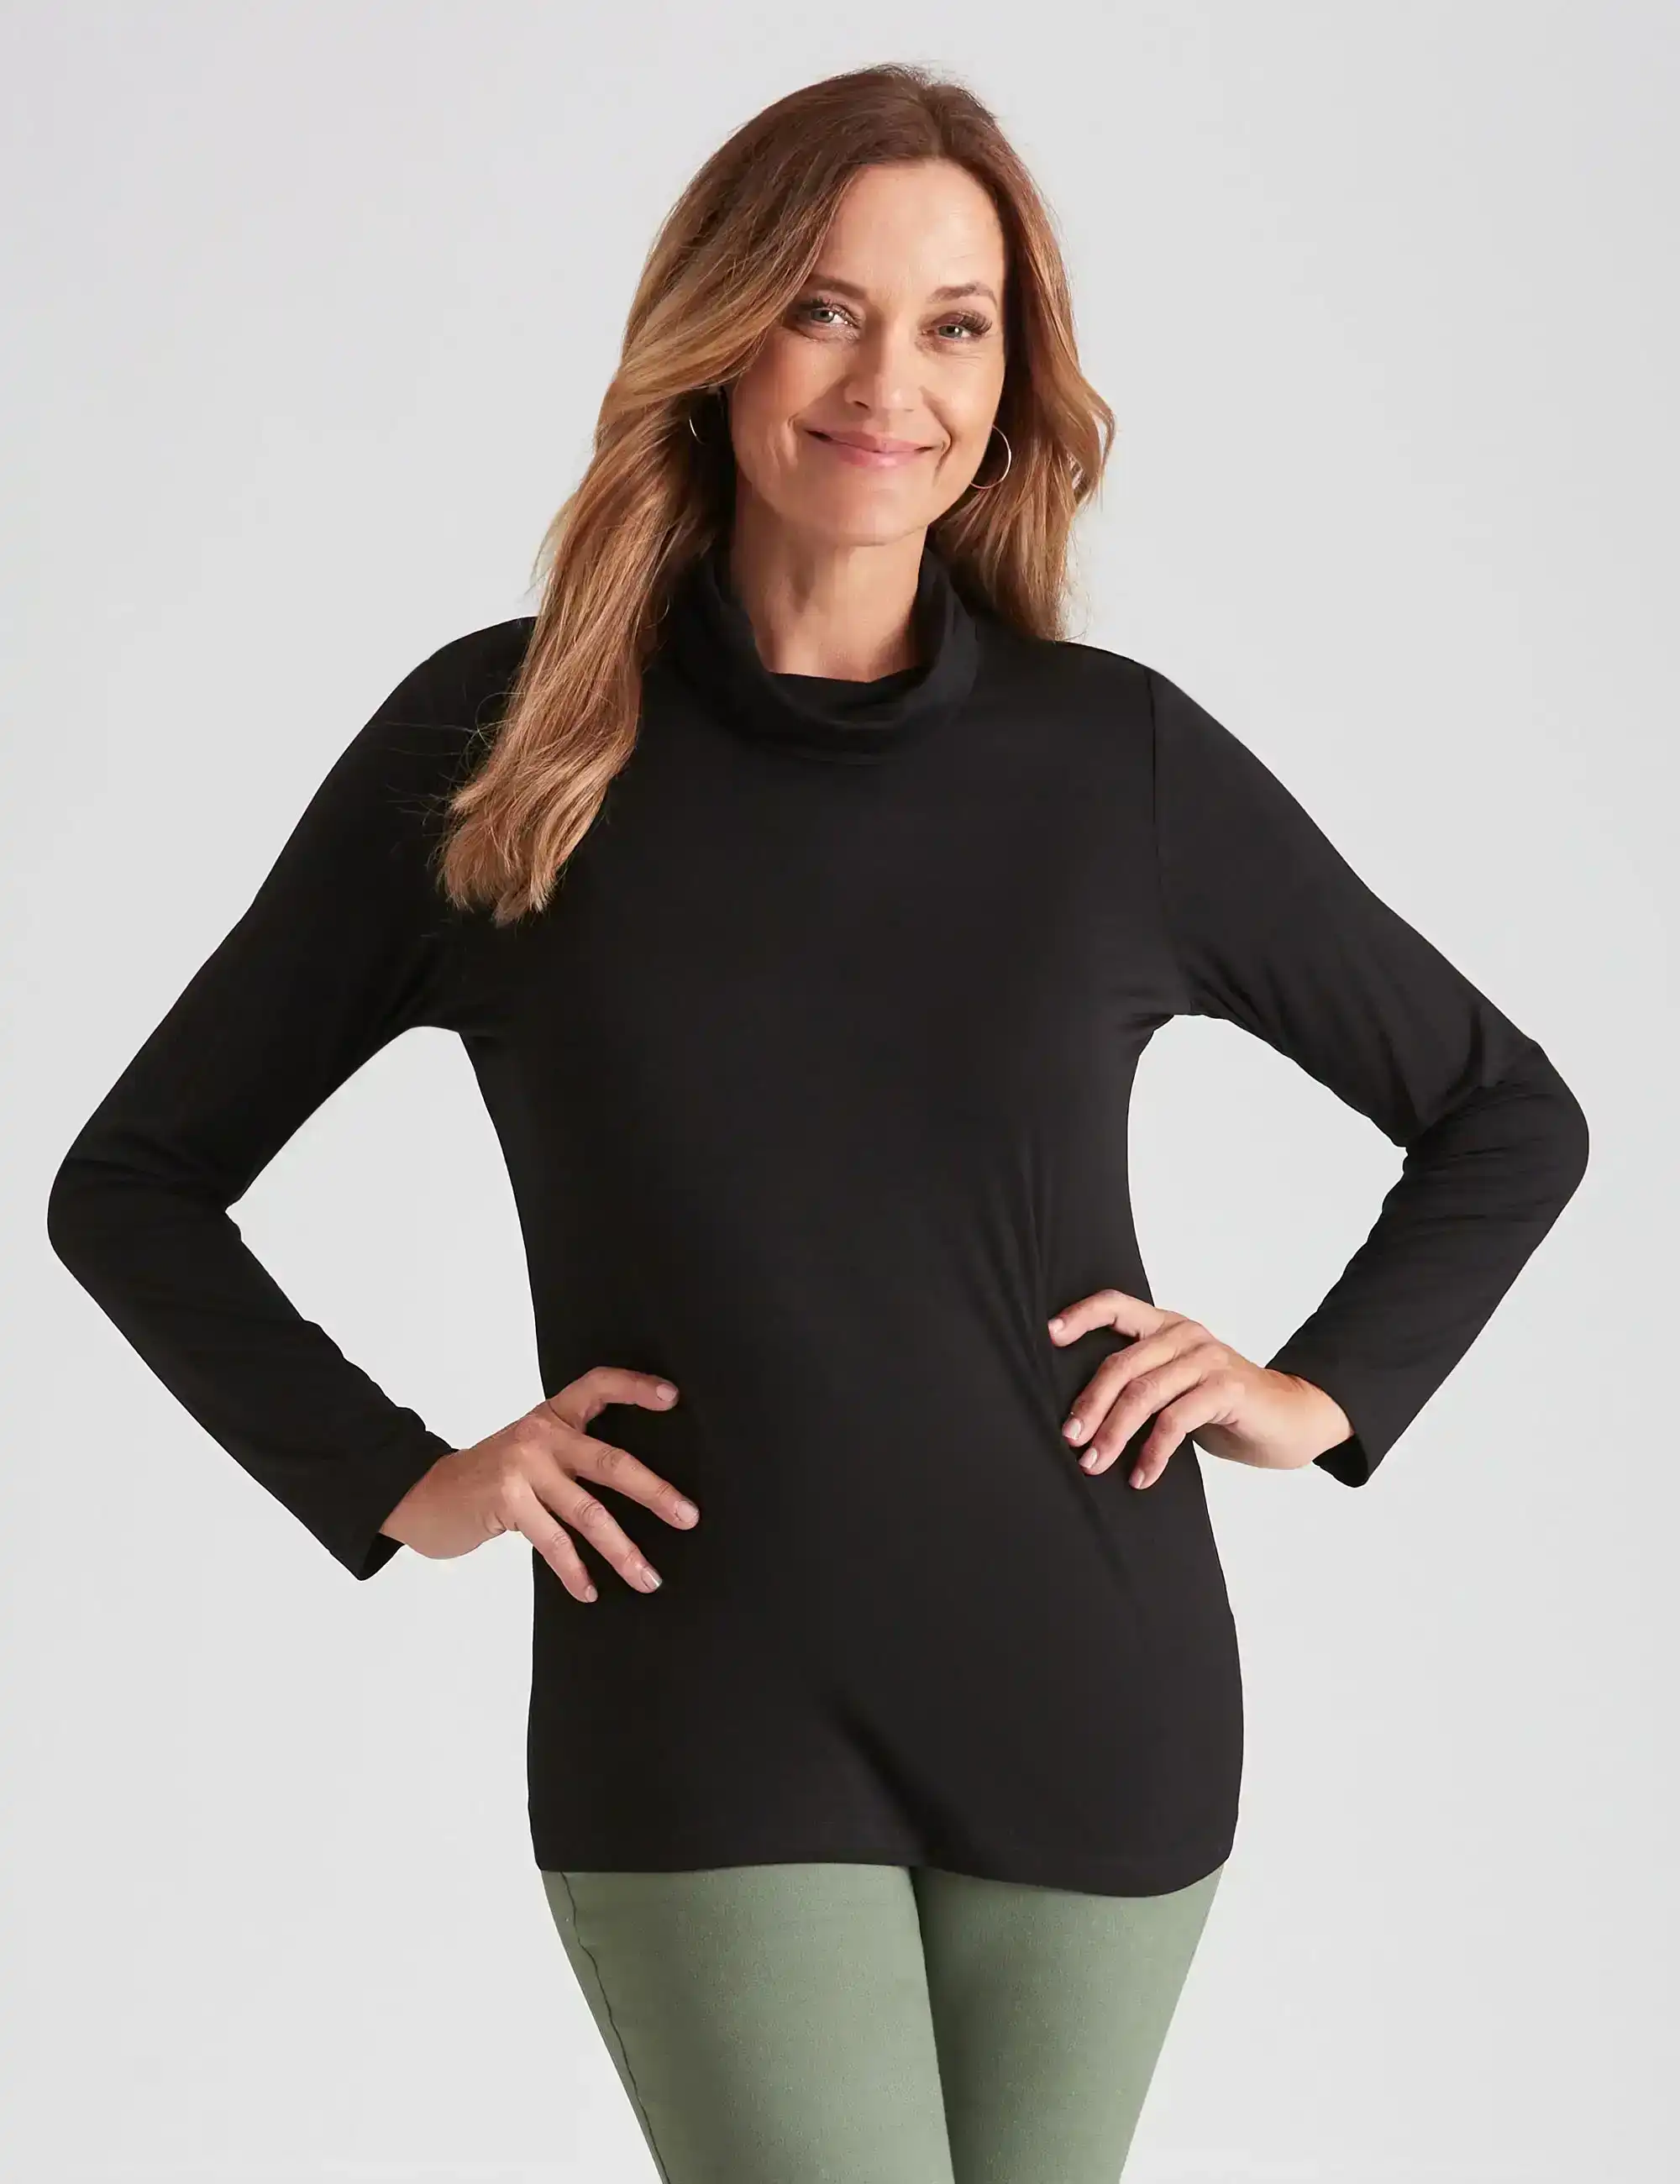 Millers Long Sleeve Jersey Roll Neck Top